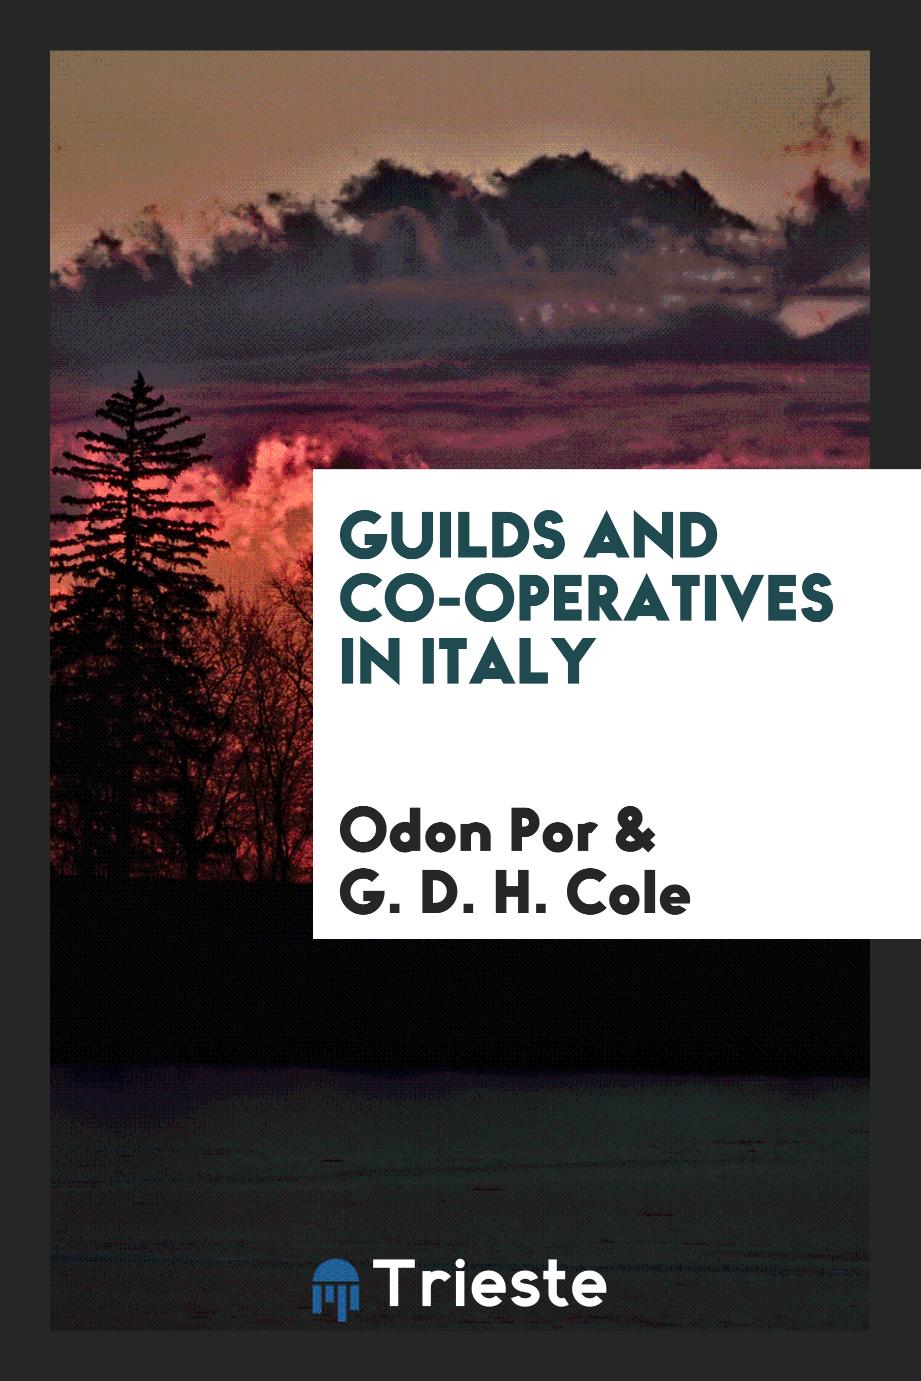 Guilds and co-operatives in Italy